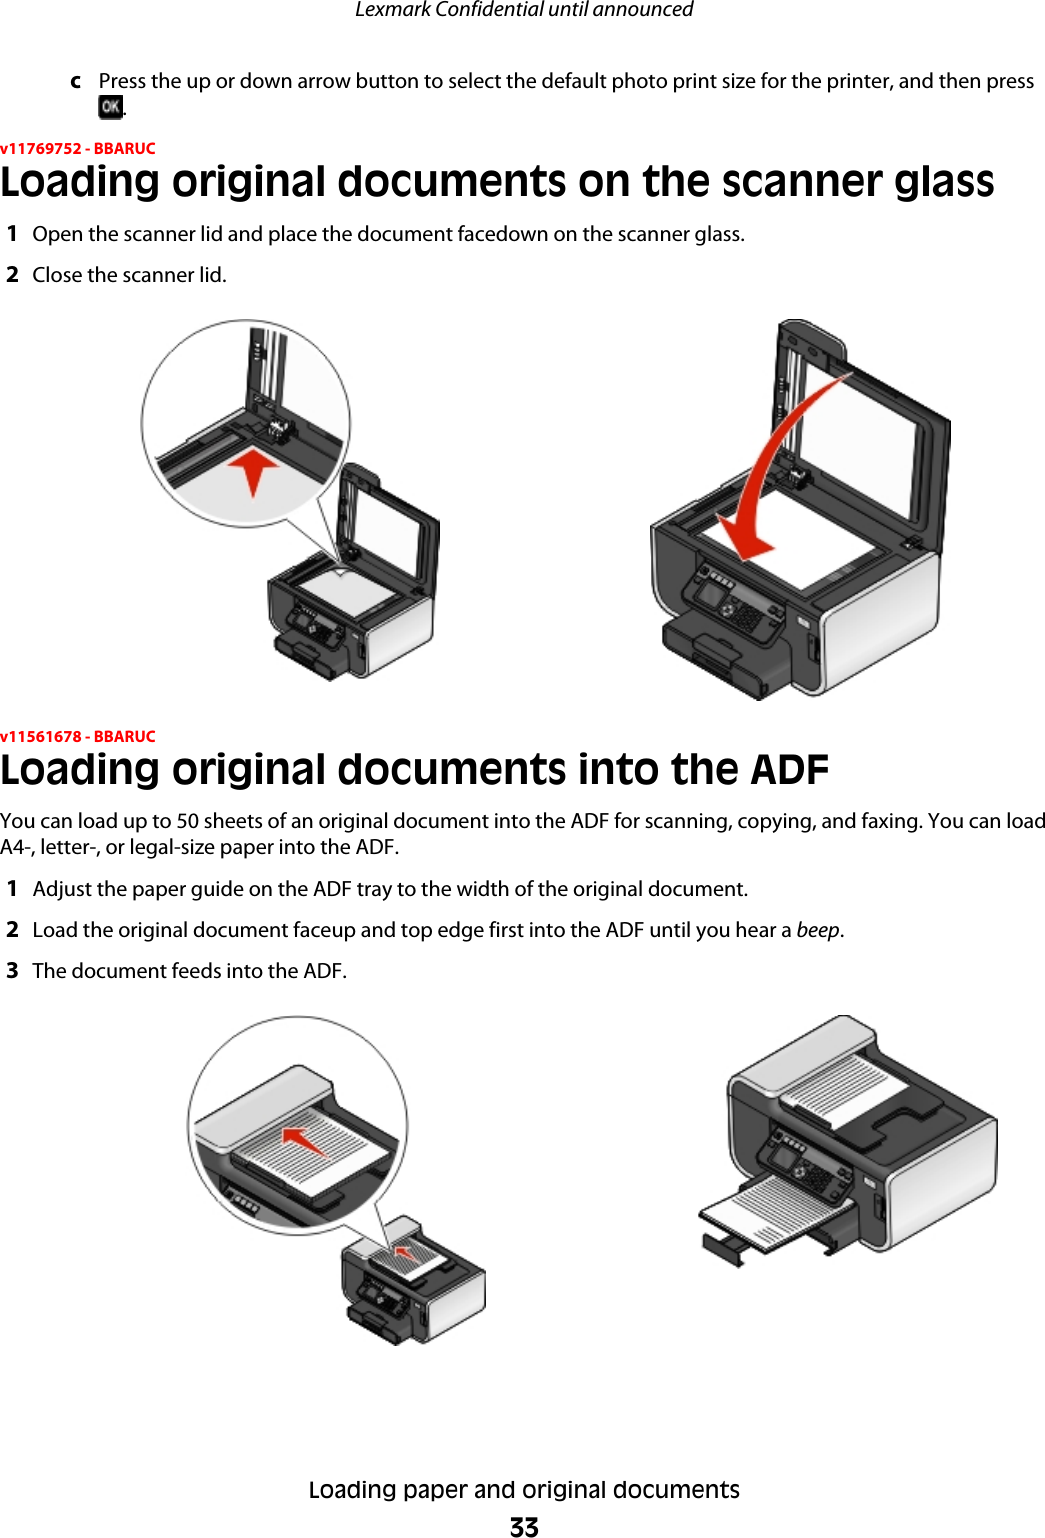 cPress the up or down arrow button to select the default photo print size for the printer, and then press.v11769752 - BBARUCLoading original documents on the scanner glass1Open the scanner lid and place the document facedown on the scanner glass.2Close the scanner lid.v11561678 - BBARUCLoading original documents into the ADFYou can load up to 50 sheets of an original document into the ADF for scanning, copying, and faxing. You can loadA4-, letter-, or legal-size paper into the ADF.1Adjust the paper guide on the ADF tray to the width of the original document.2Load the original document faceup and top edge first into the ADF until you hear a beep.3The document feeds into the ADF.Lexmark Confidential until announcedLoading paper and original documents33